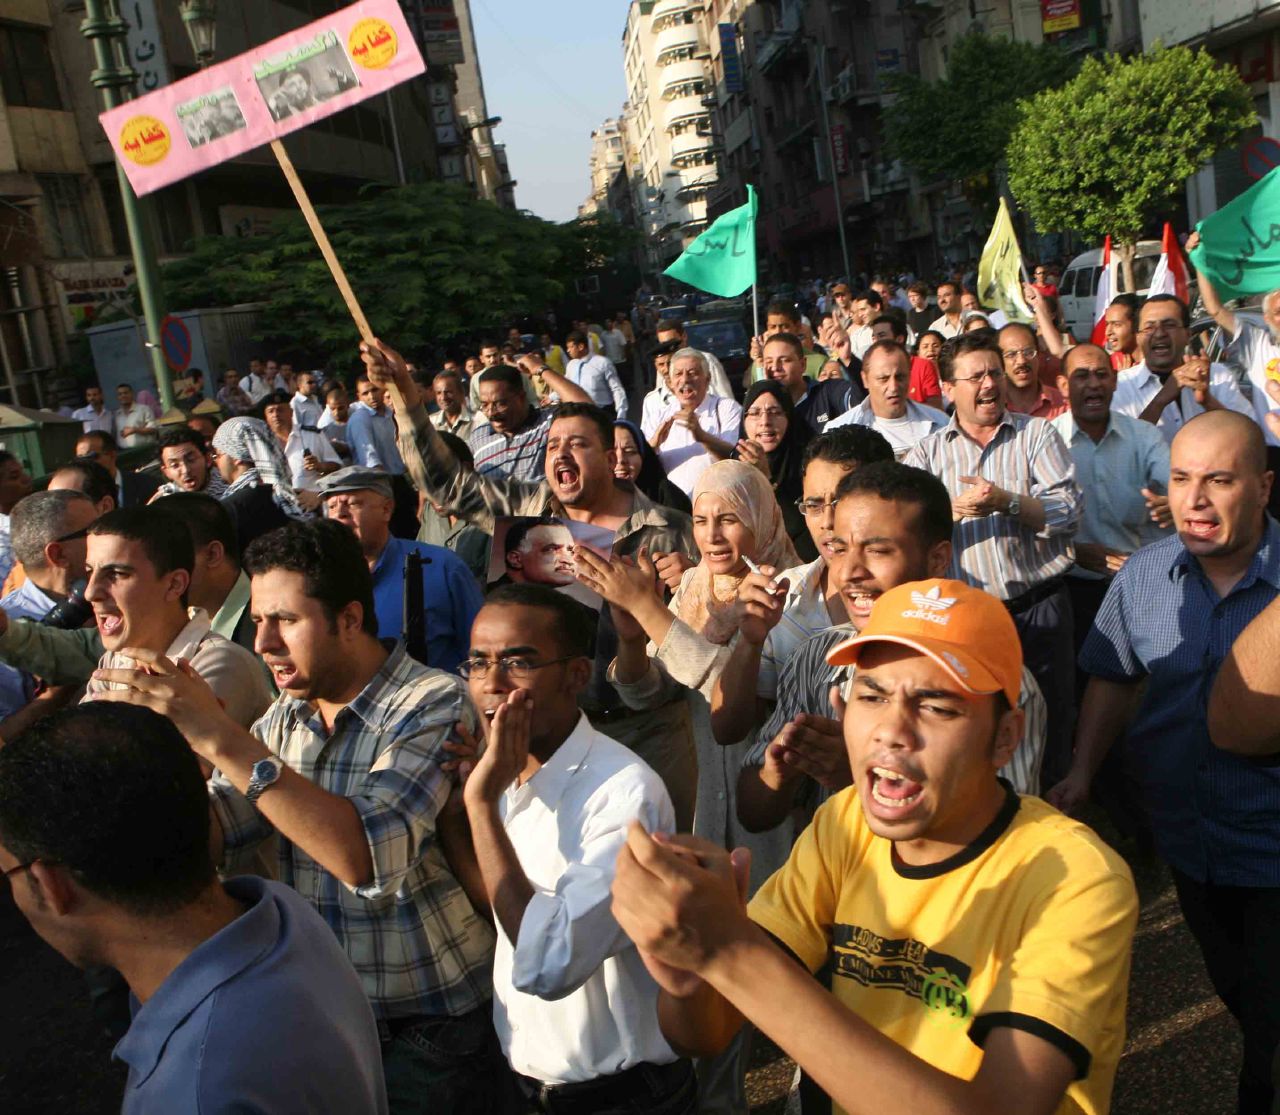 Kefaya activists march from the Nasserist Party HQ in Talaat Harb St, towards Tahrir Sq (Photo by Amr Abdallah, 26 July 2006)